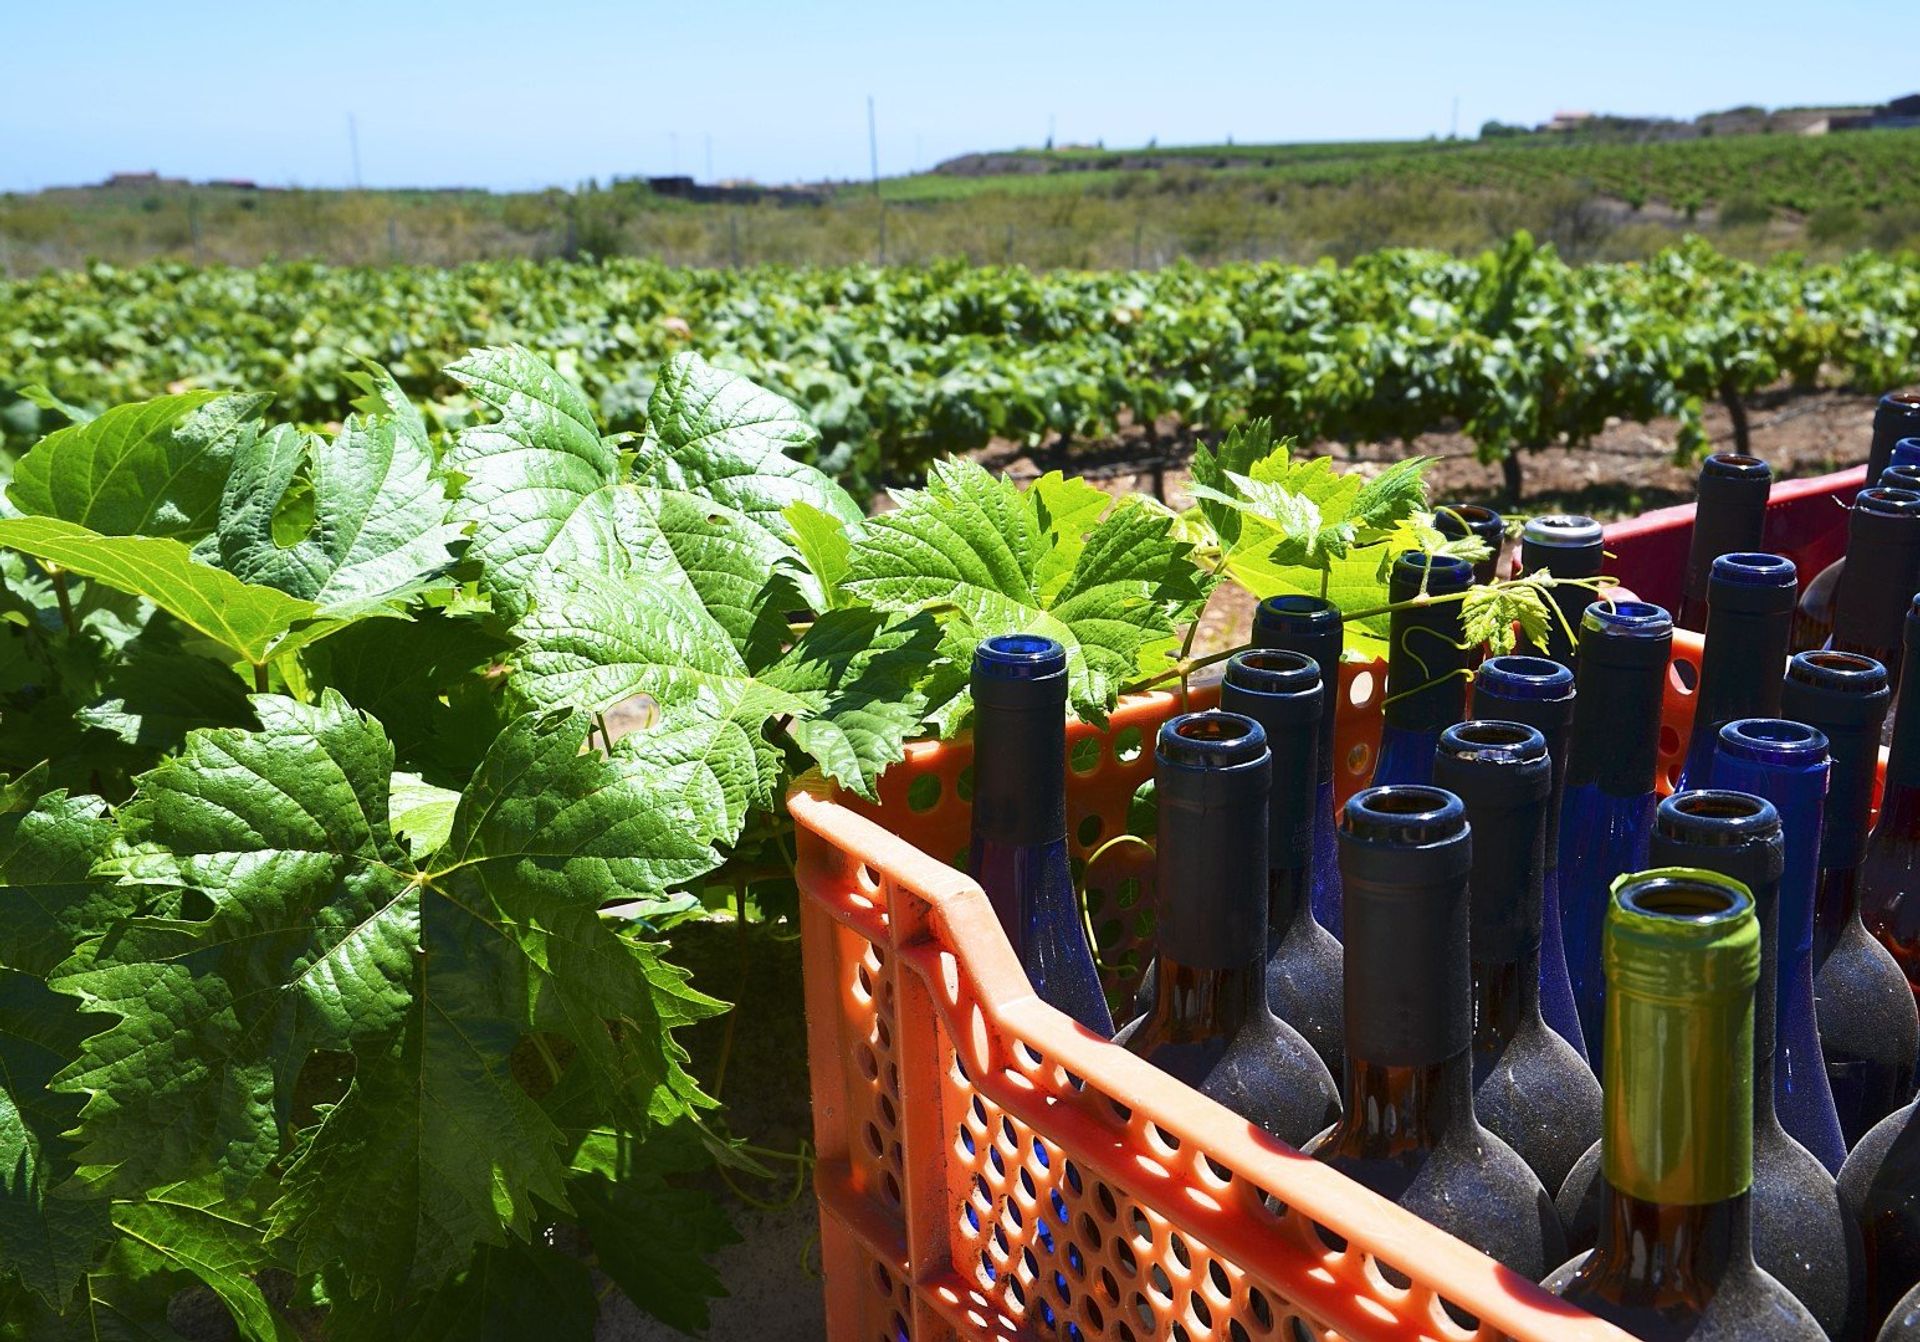 Take a wine tour and discover the agricultural history of this popular wine making region